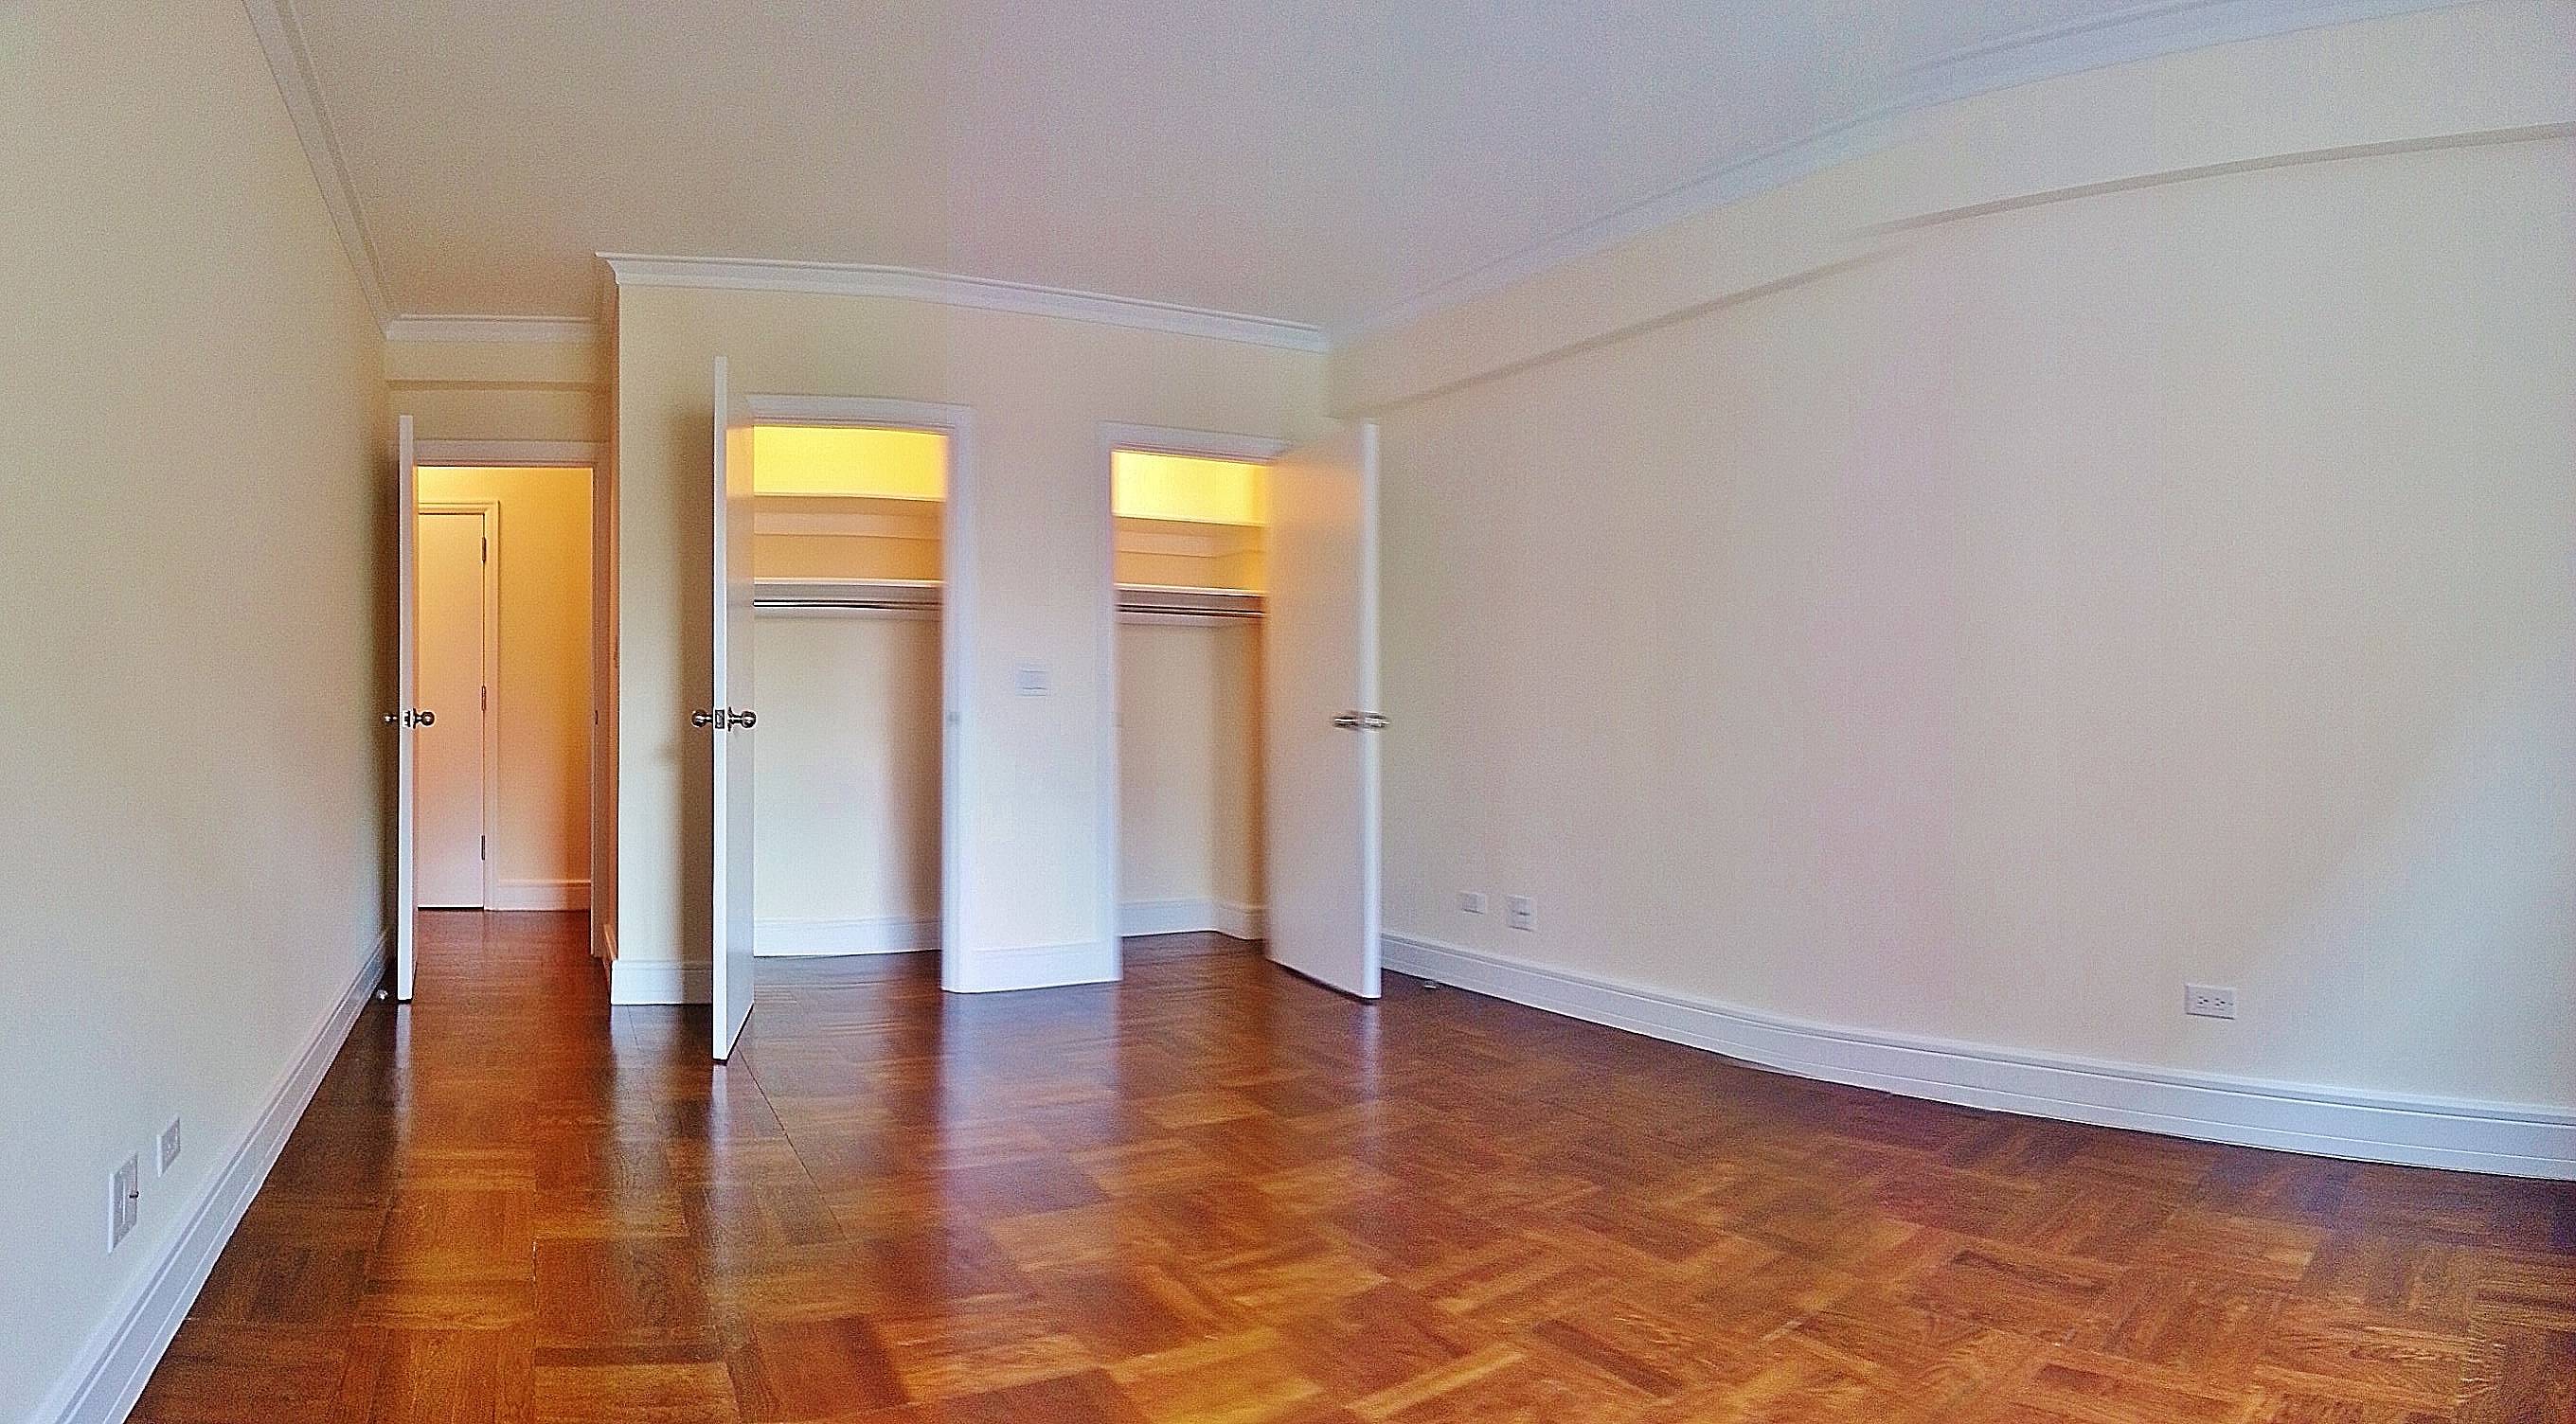 UPPER EAST SIDE e80's AND 3rd AVE. BEAUTIFUL CORNER ONE BEDROOM!!!